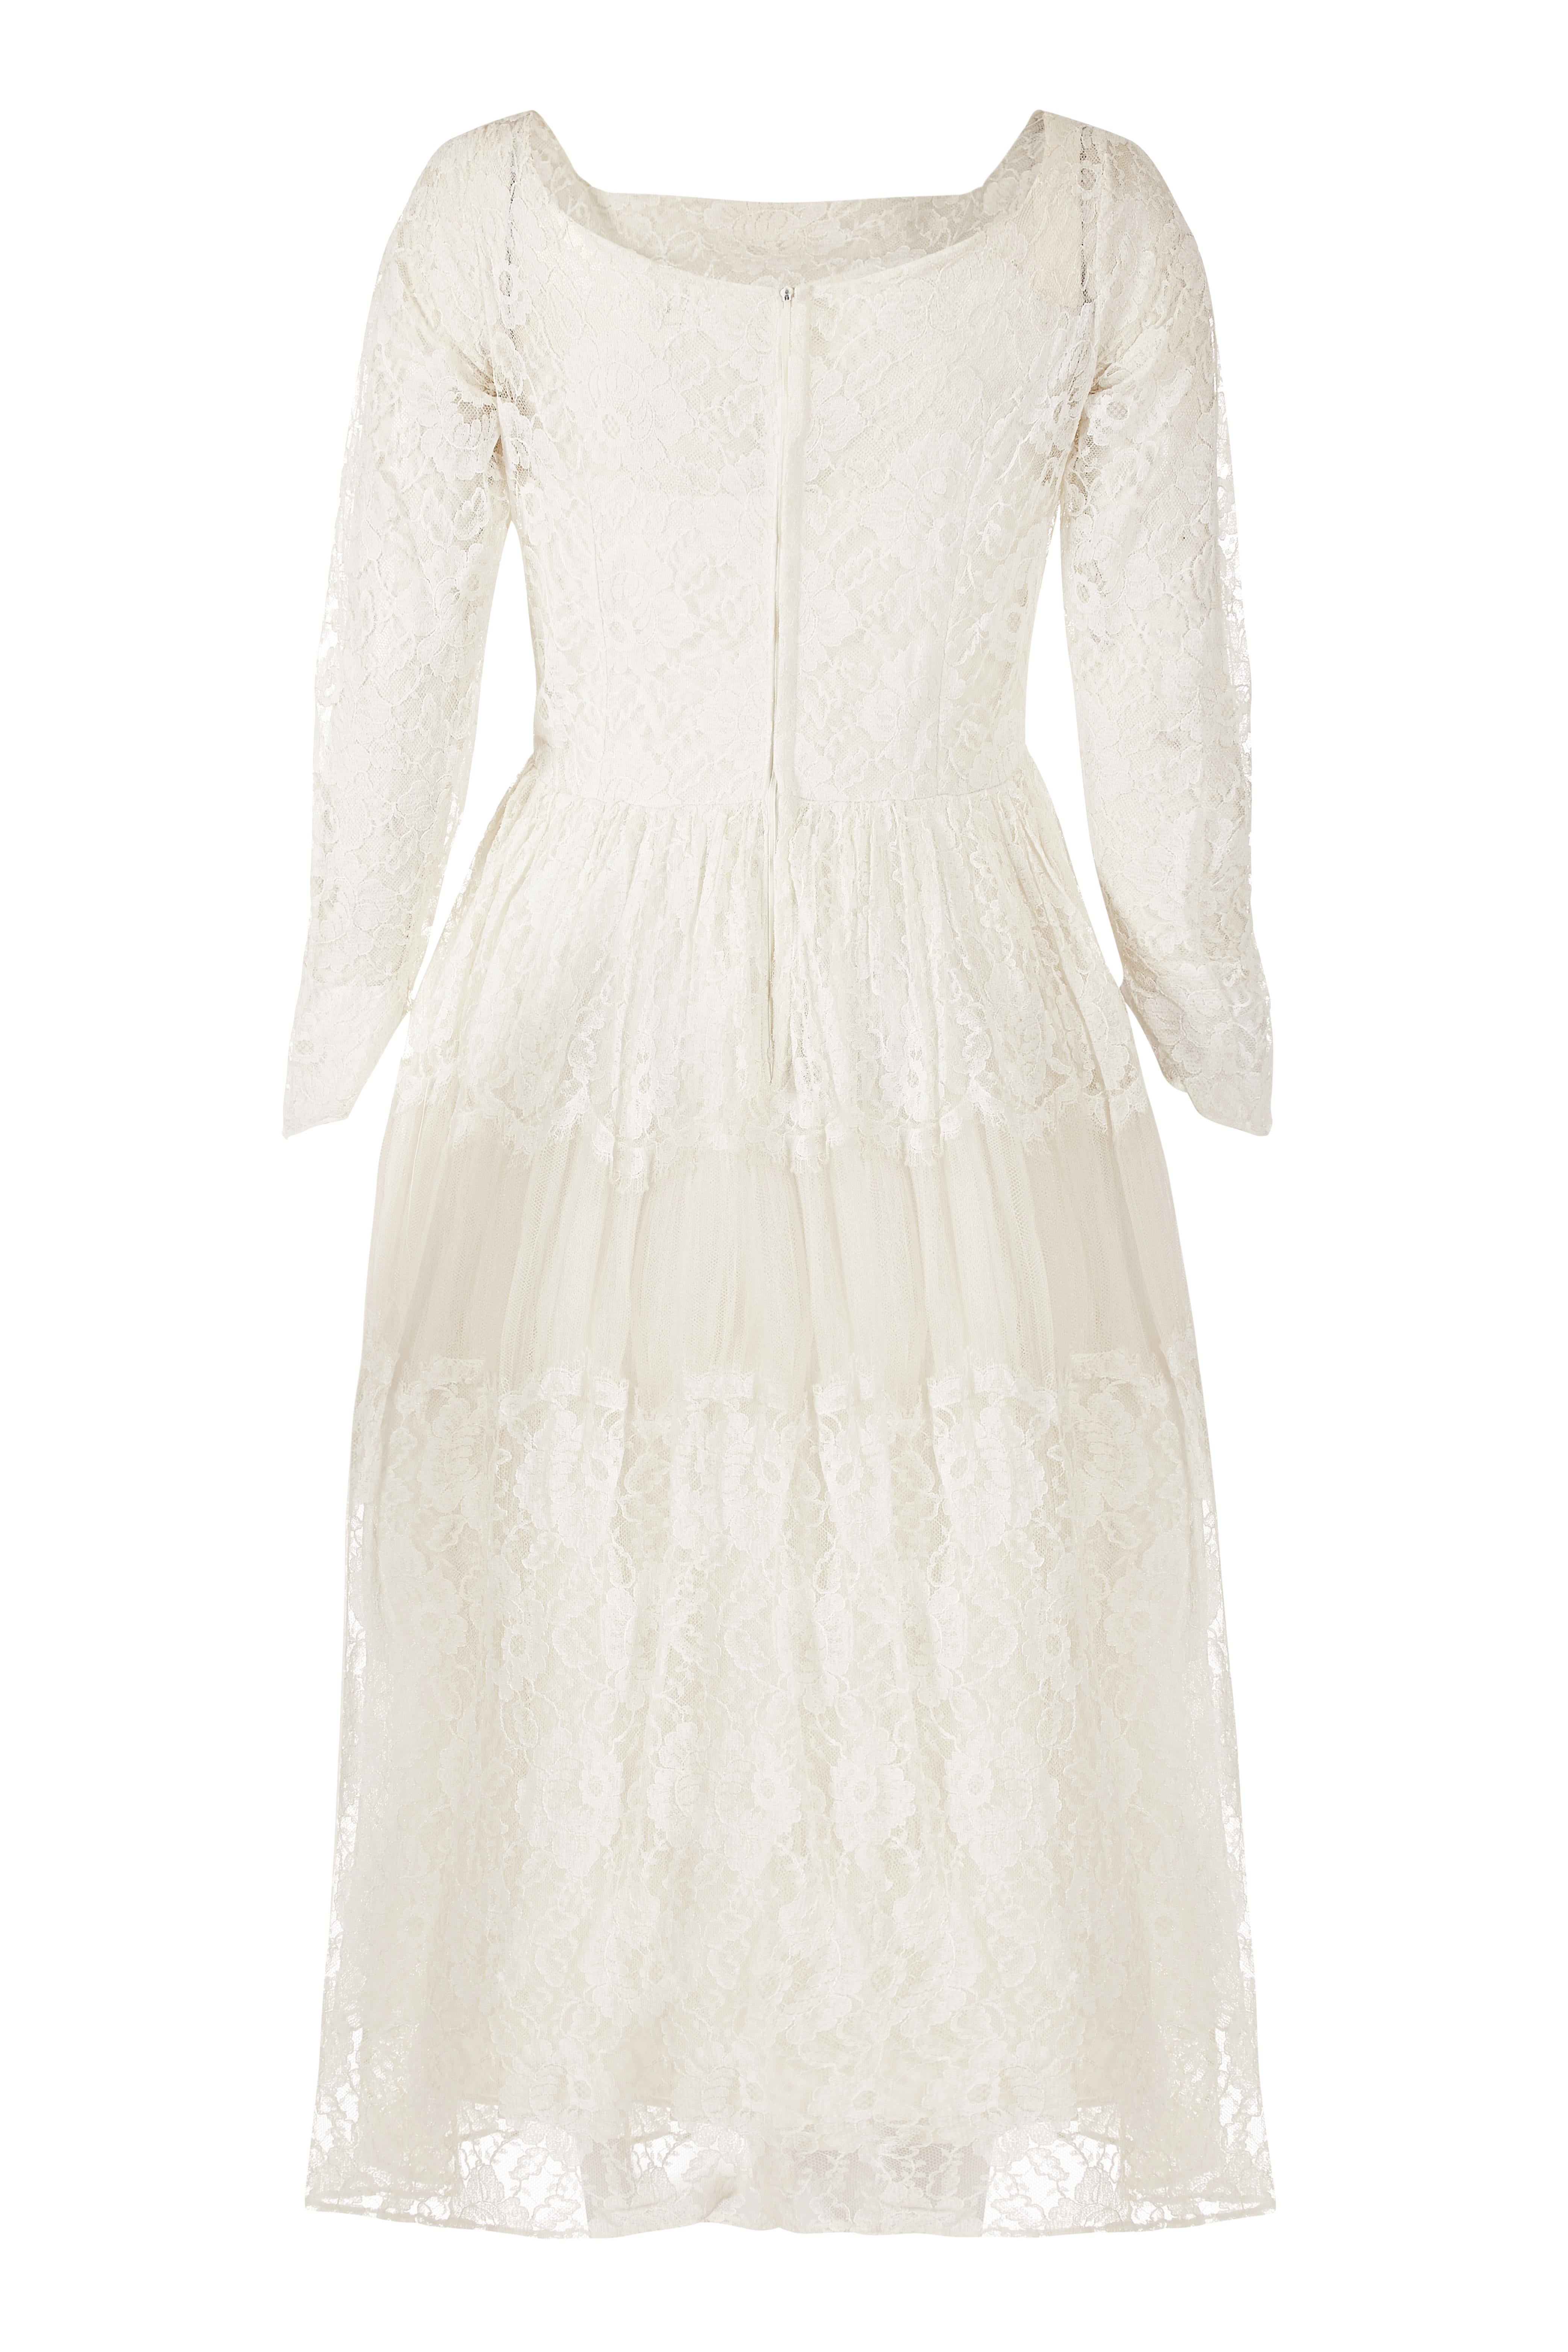 This pretty early 1960s or late 1950s white Chantilly style lace bridal gown has a fairy tale charm. The man-made, Chantilly style lace overlay covers the dress in its entirety and features a delicate floral design. The lace on the skirt is